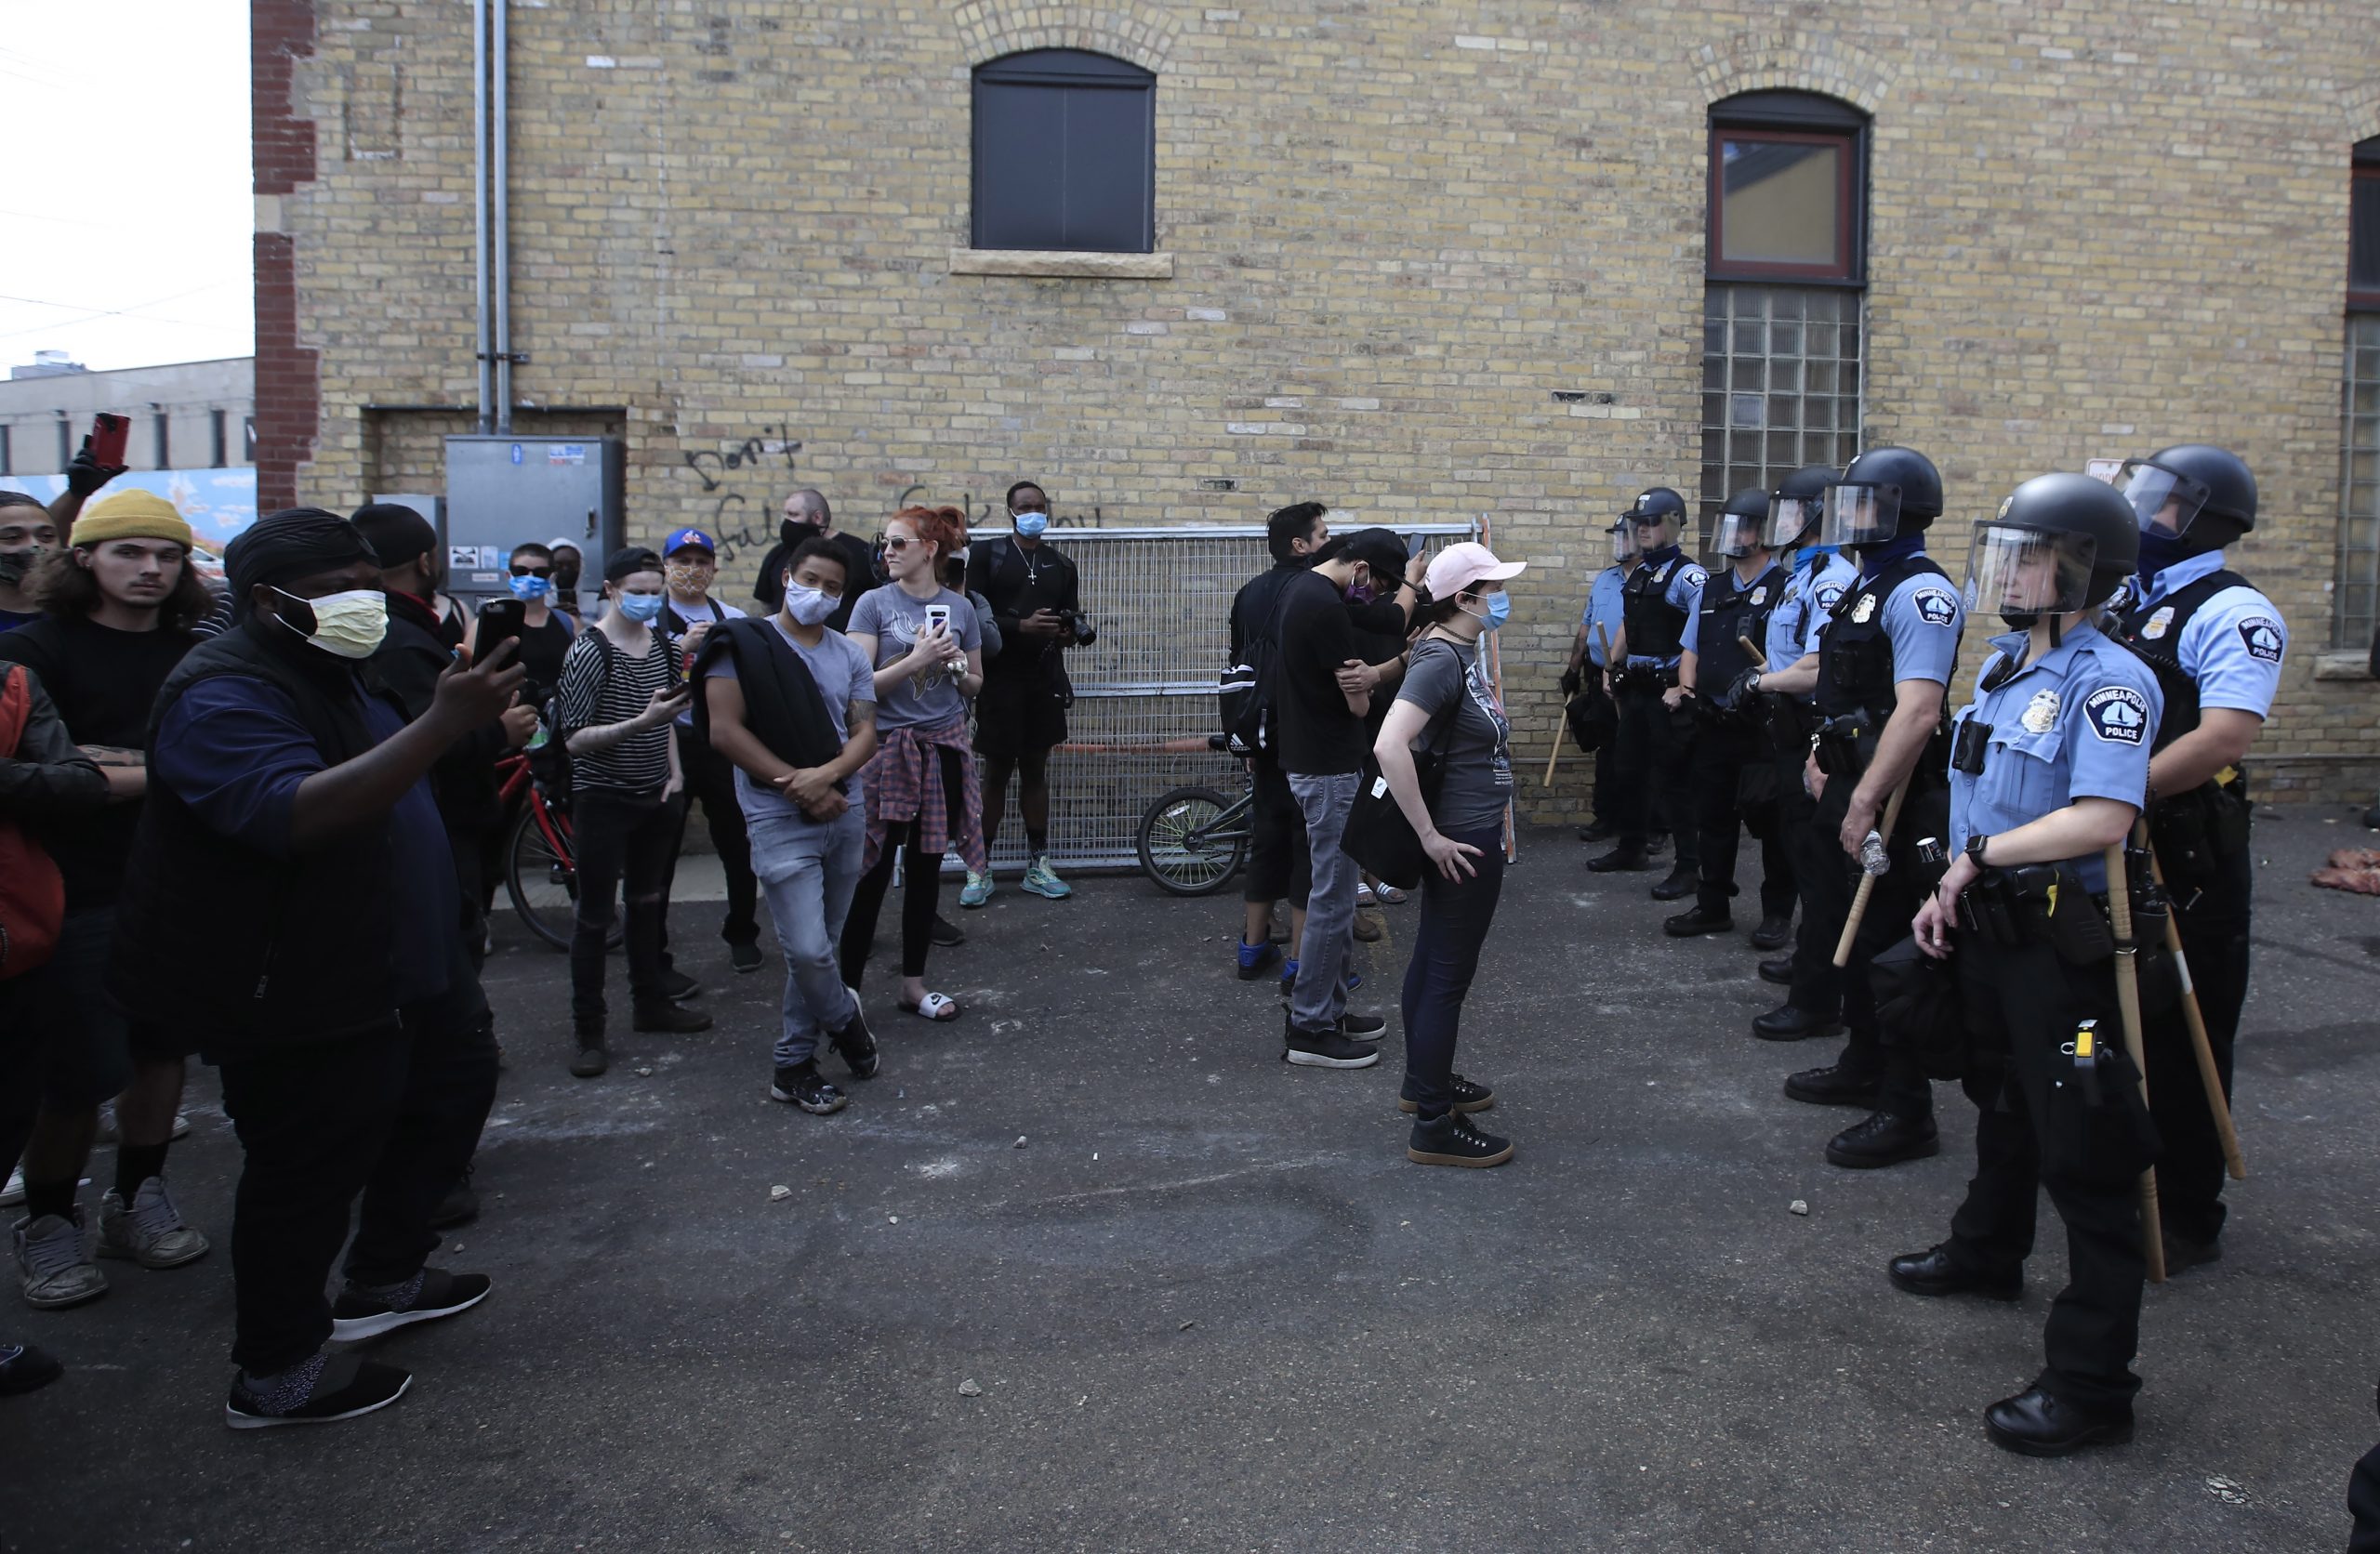 epa08450448 Protesters face off with police outside the Minneapolis Police Department 3rd Precinct as a third day of protests continues over the arrest of George Floyd, who later died in police custody, in Minneapolis, Minnesota, USA, 28 May 2020. A bystander's video posted online on 25 May, appeared to show George Floyd, 46, pleading with arresting officers that he couldn't breathe as an officer knelt on his neck. The unarmed black man later died in police custody.  EPA/TANNEN MAURY